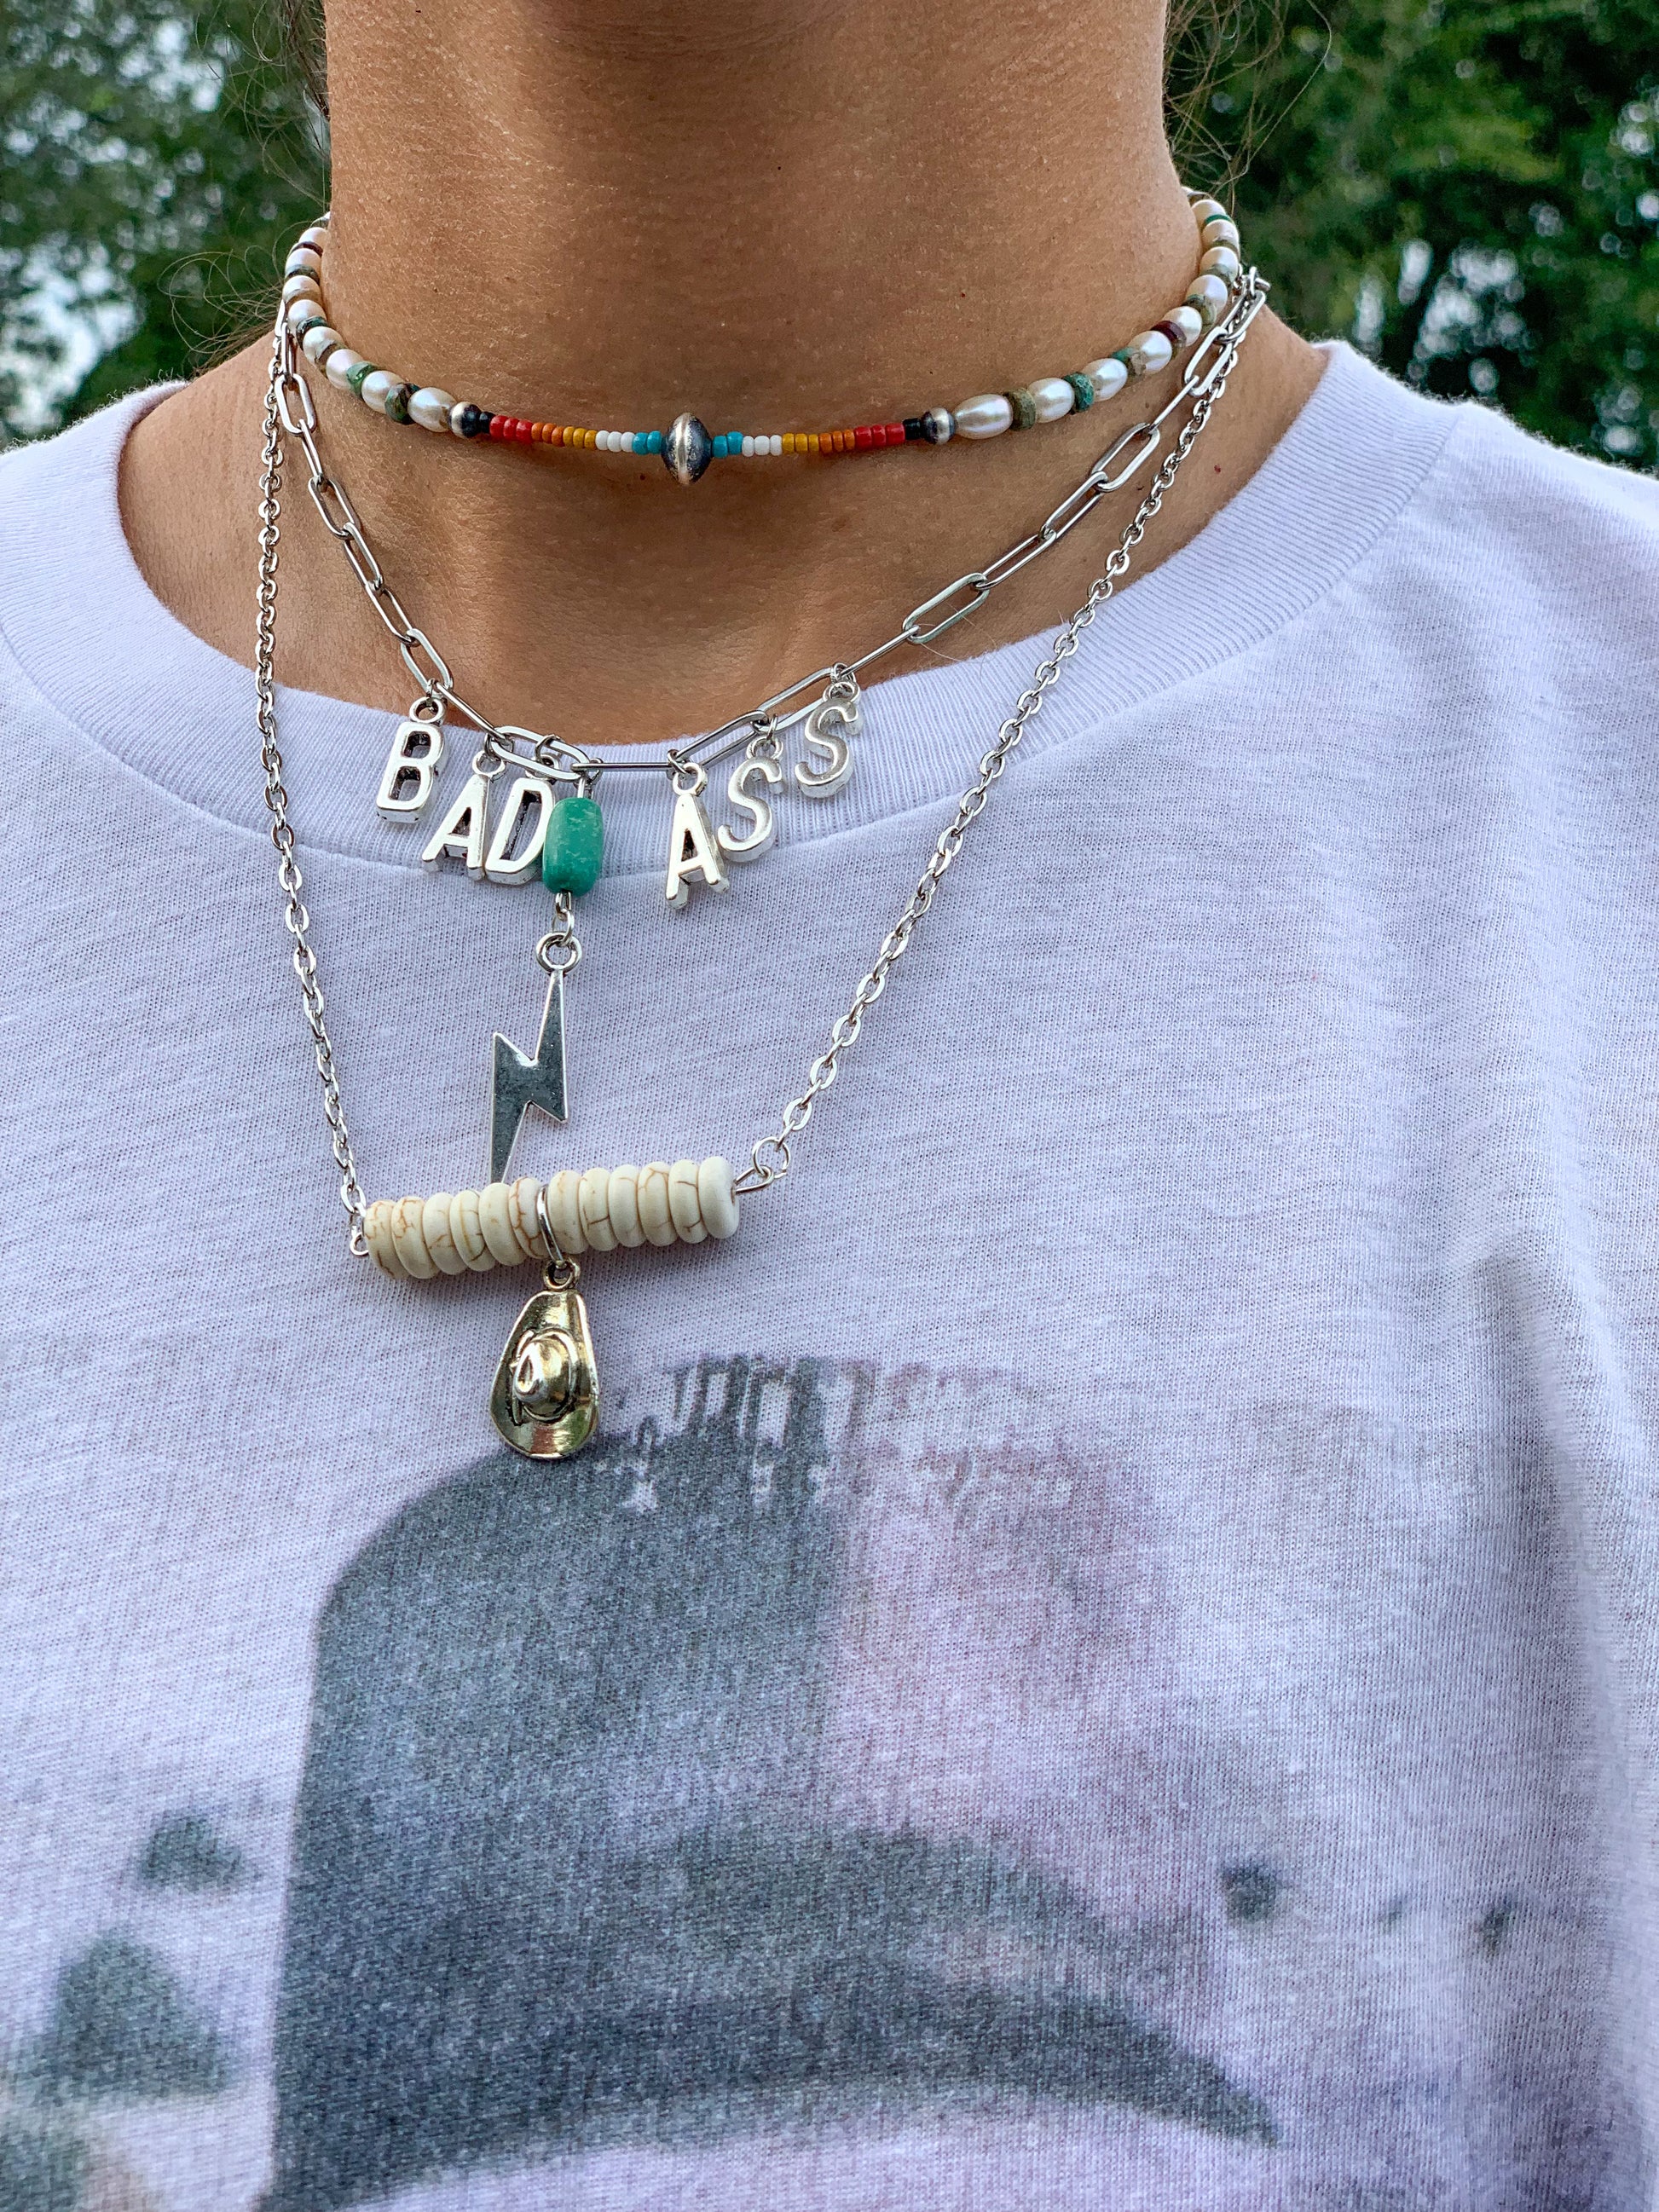 How the bad a** necklace fits